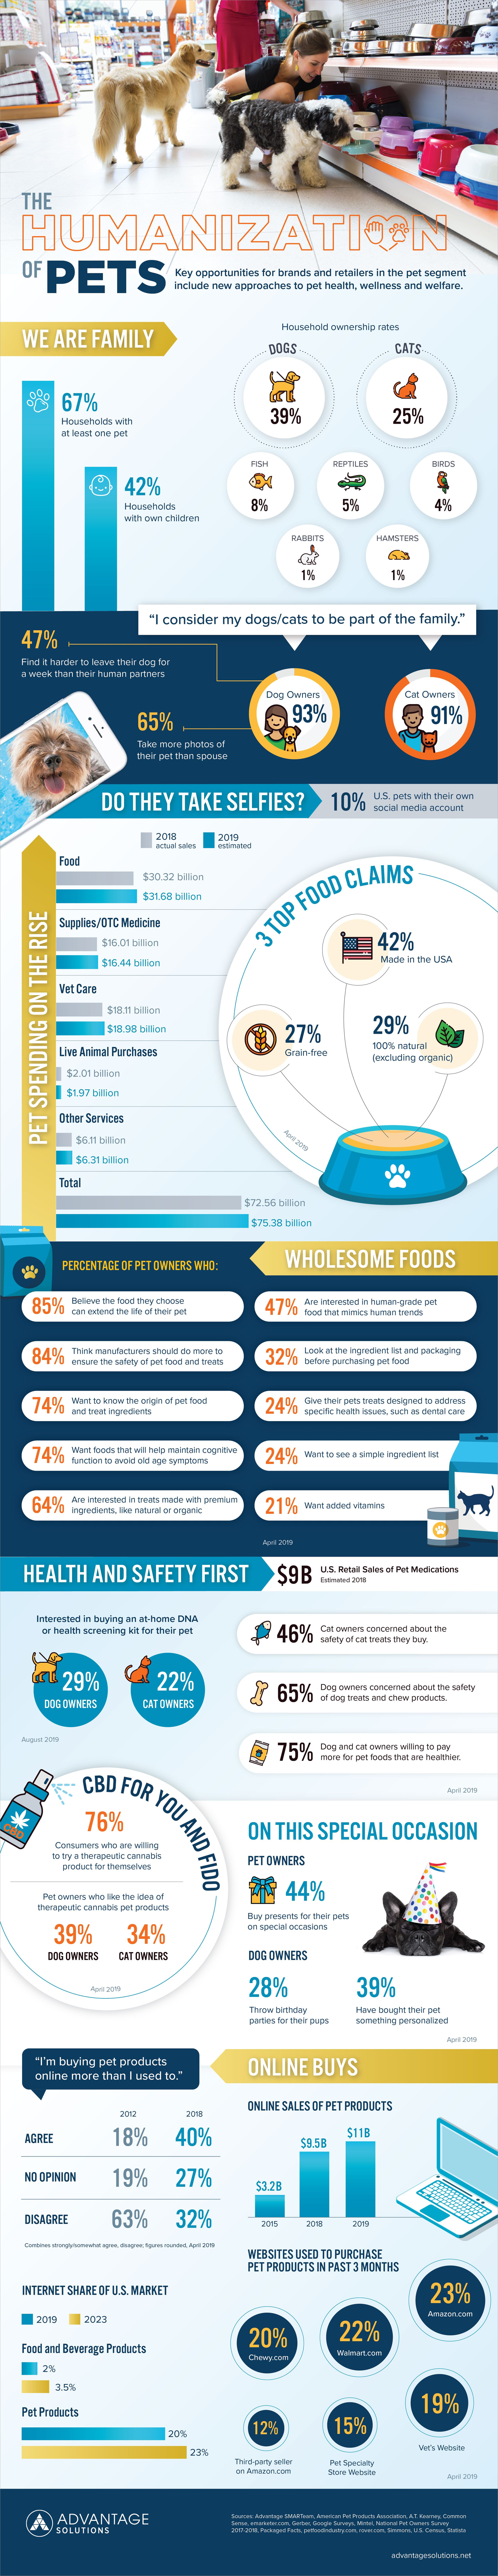 The Humanization of Pets Infographic